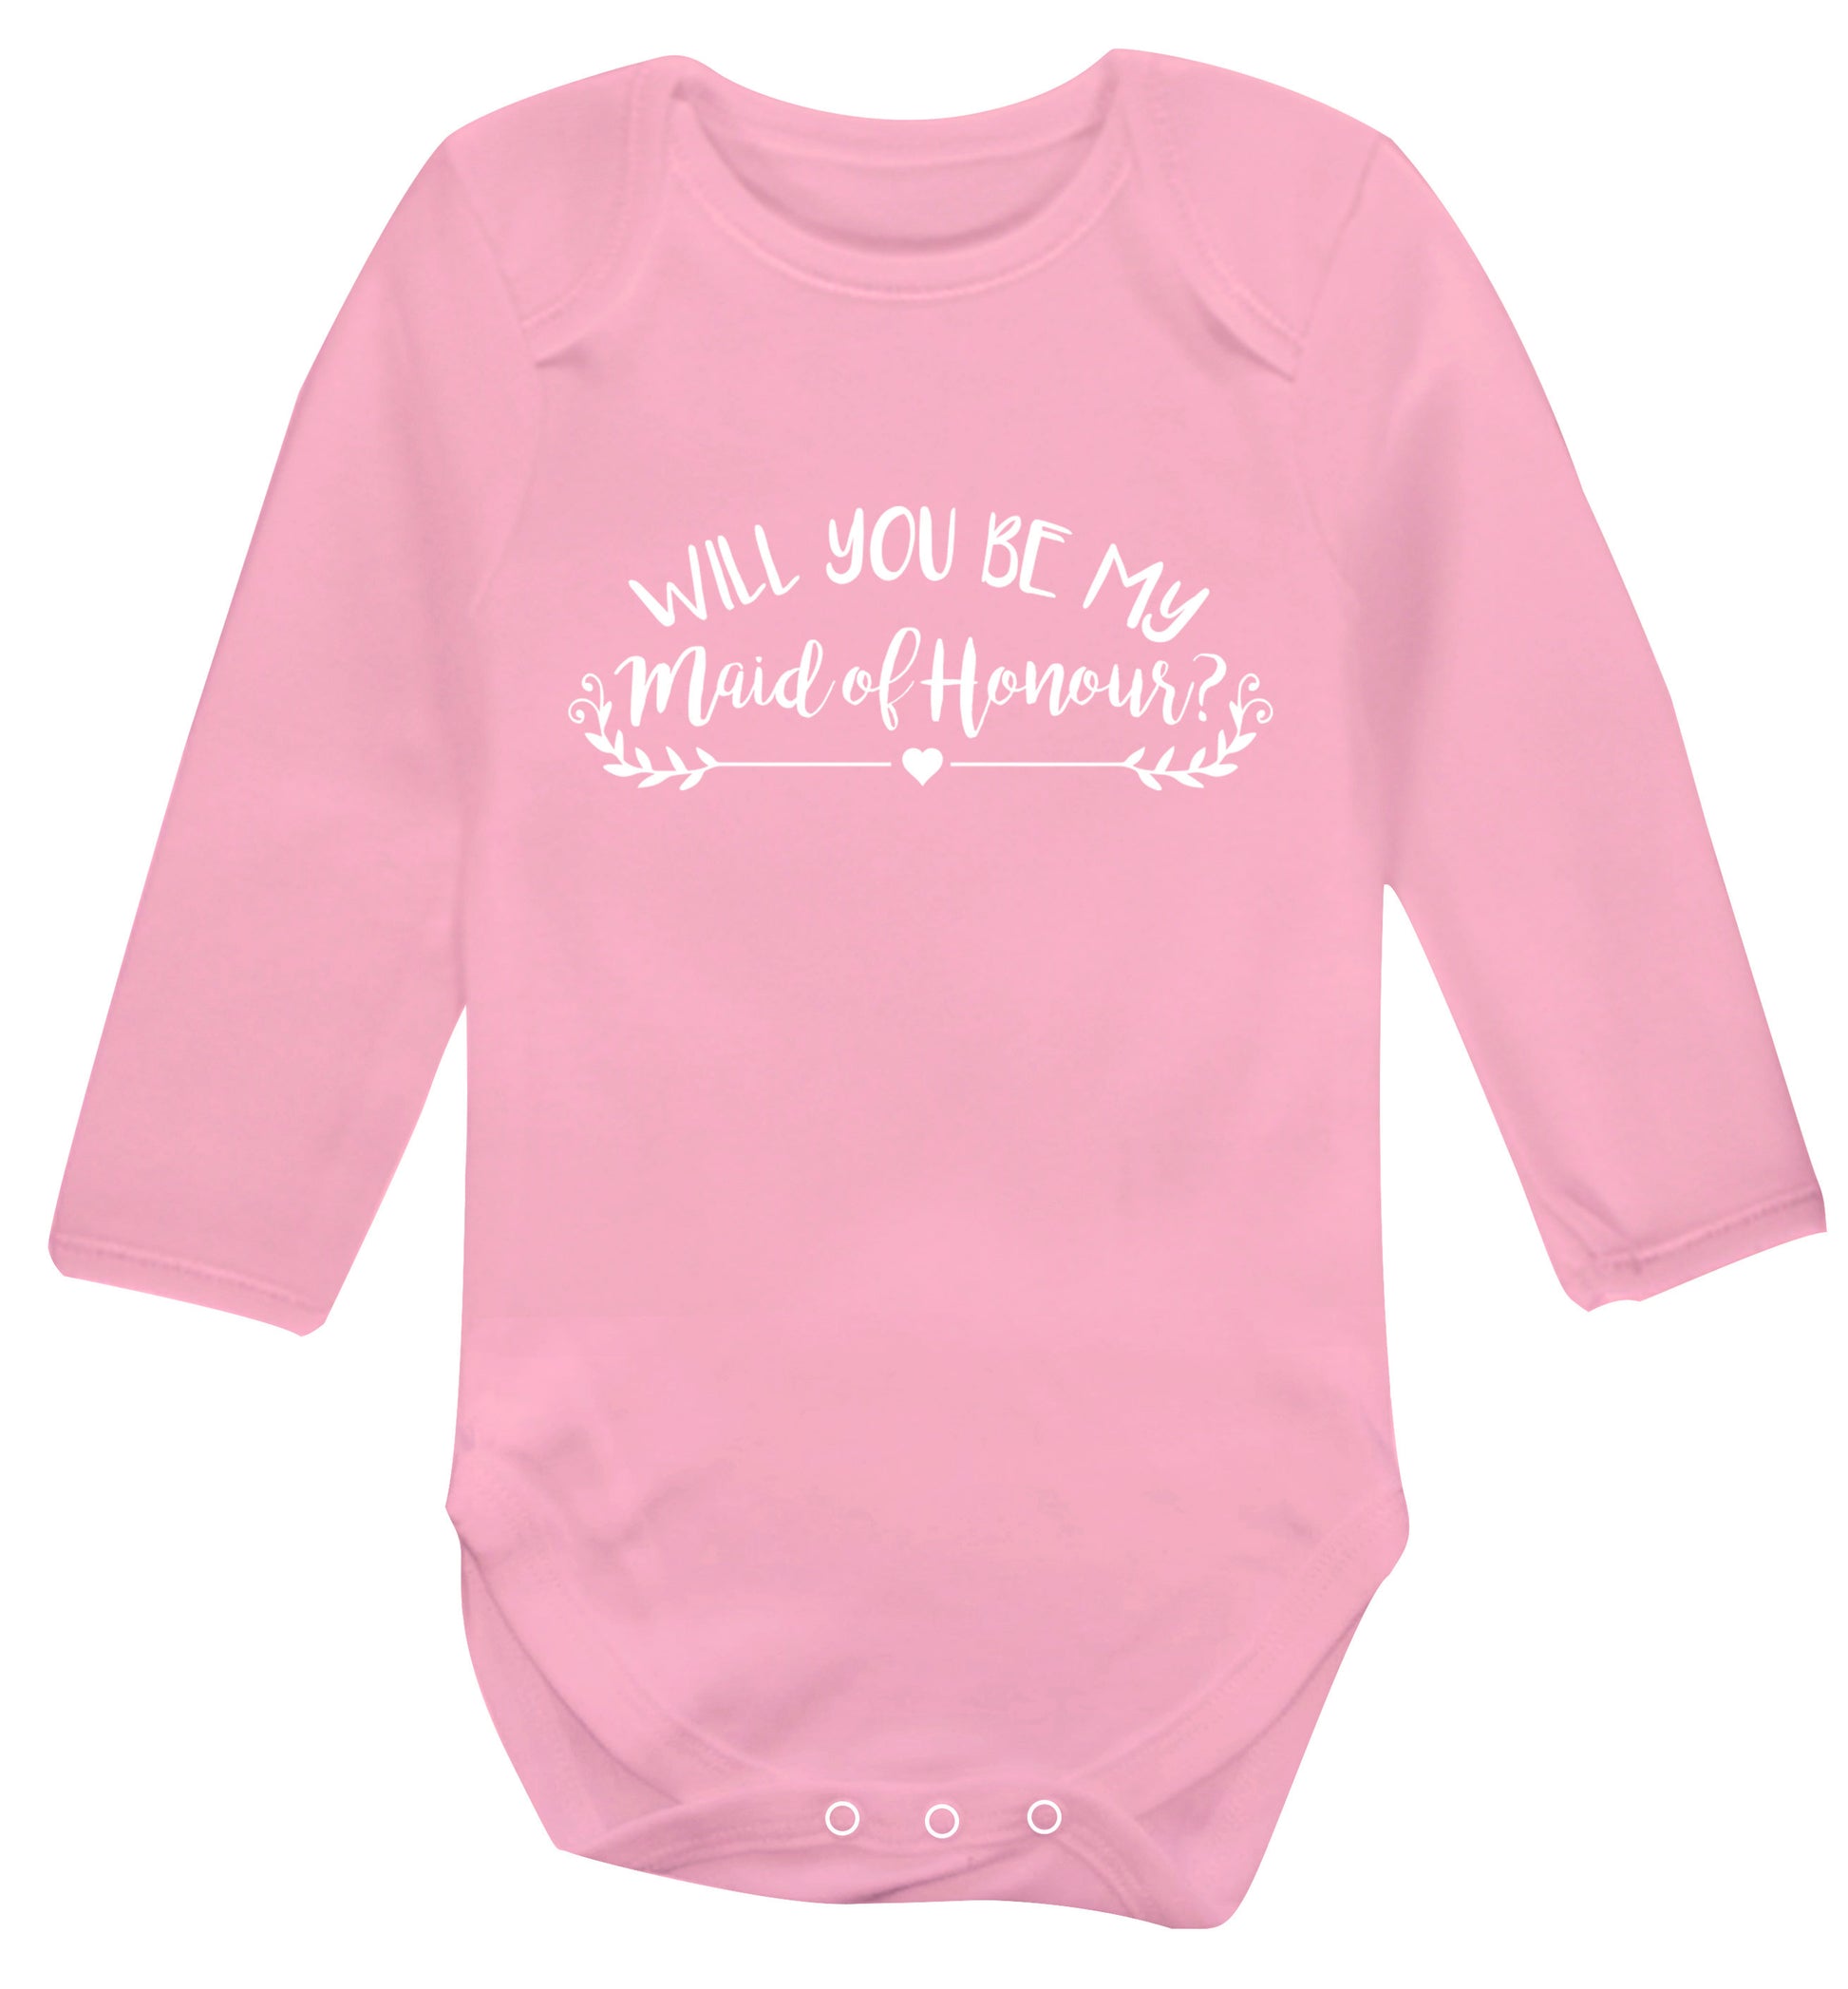 Will you be my maid of honour? Baby Vest long sleeved pale pink 6-12 months